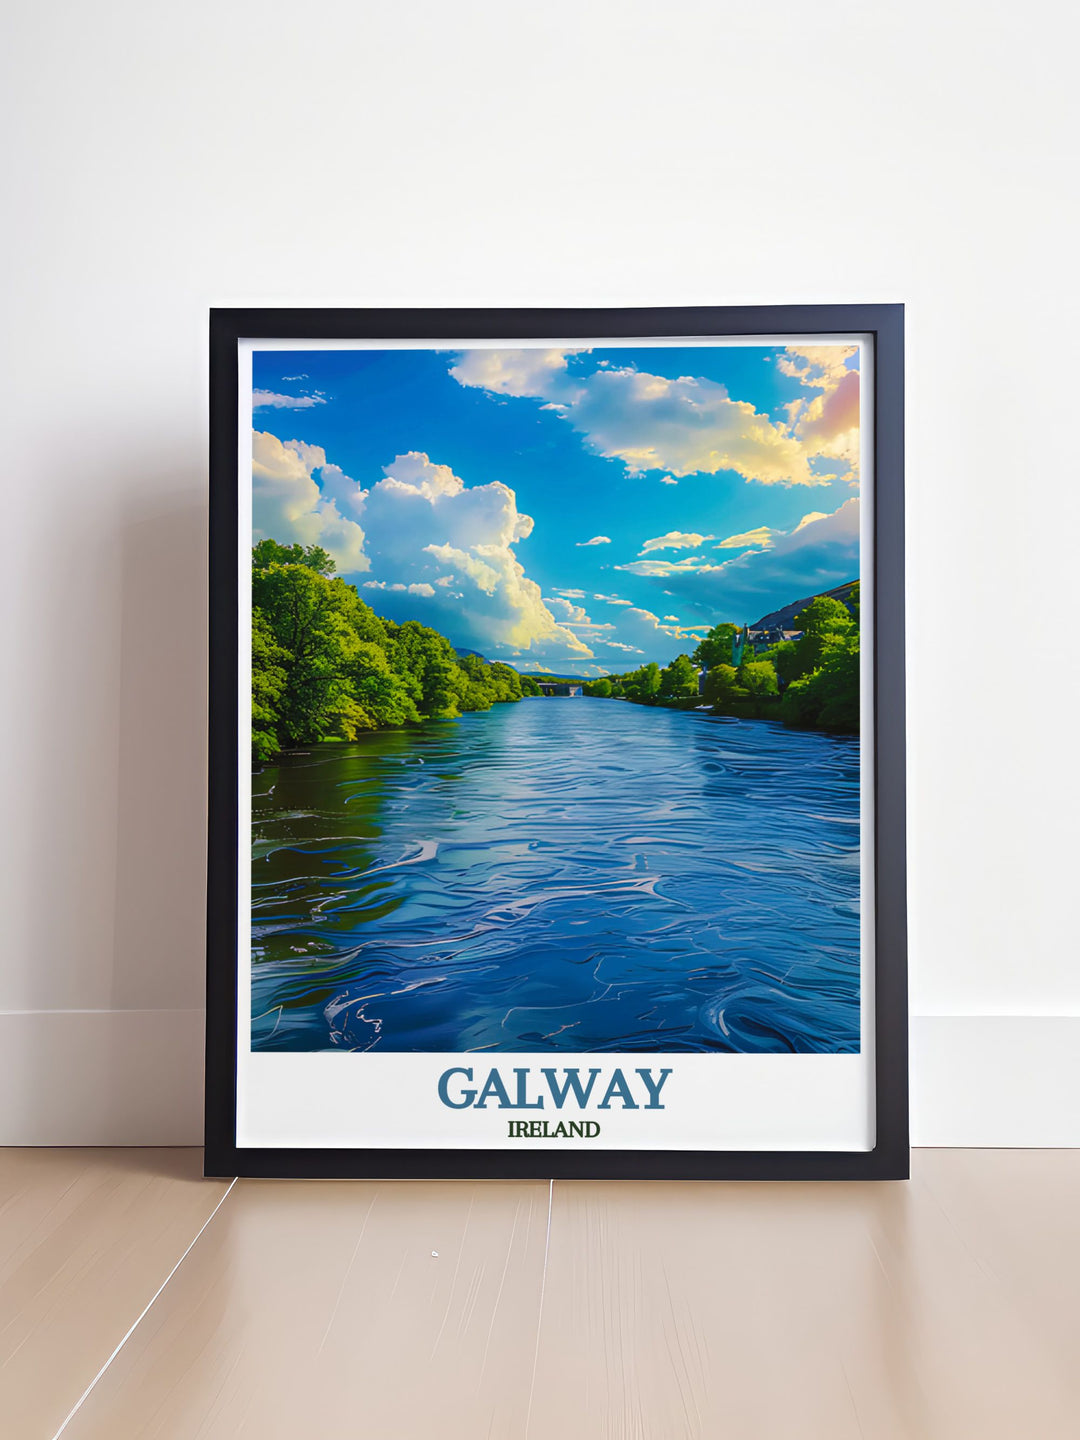 Highlighting the serene waters and picturesque scenery of the River Corrib, this travel poster showcases the natural beauty of Irelands west coast. The scene includes lush greenery and charming bridges, ideal for those who appreciate tranquil landscapes.